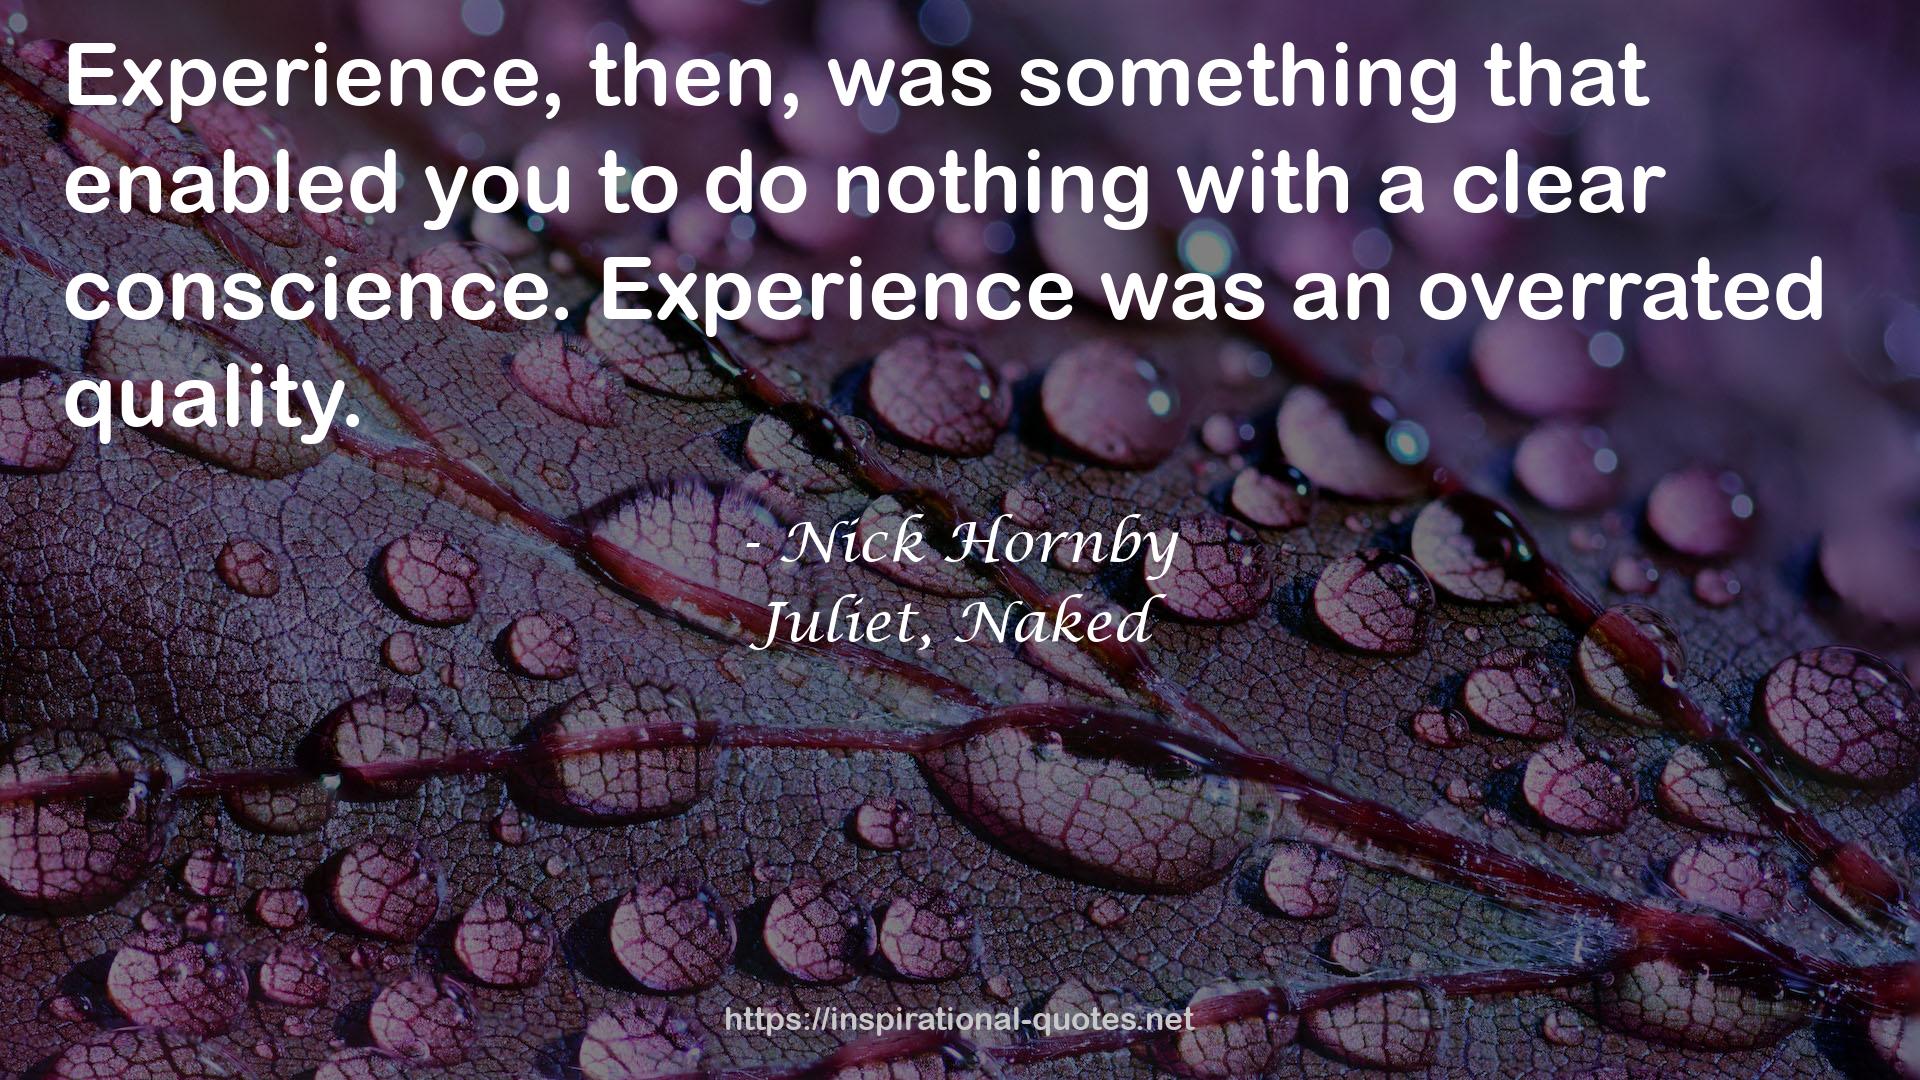 Nick Hornby QUOTES